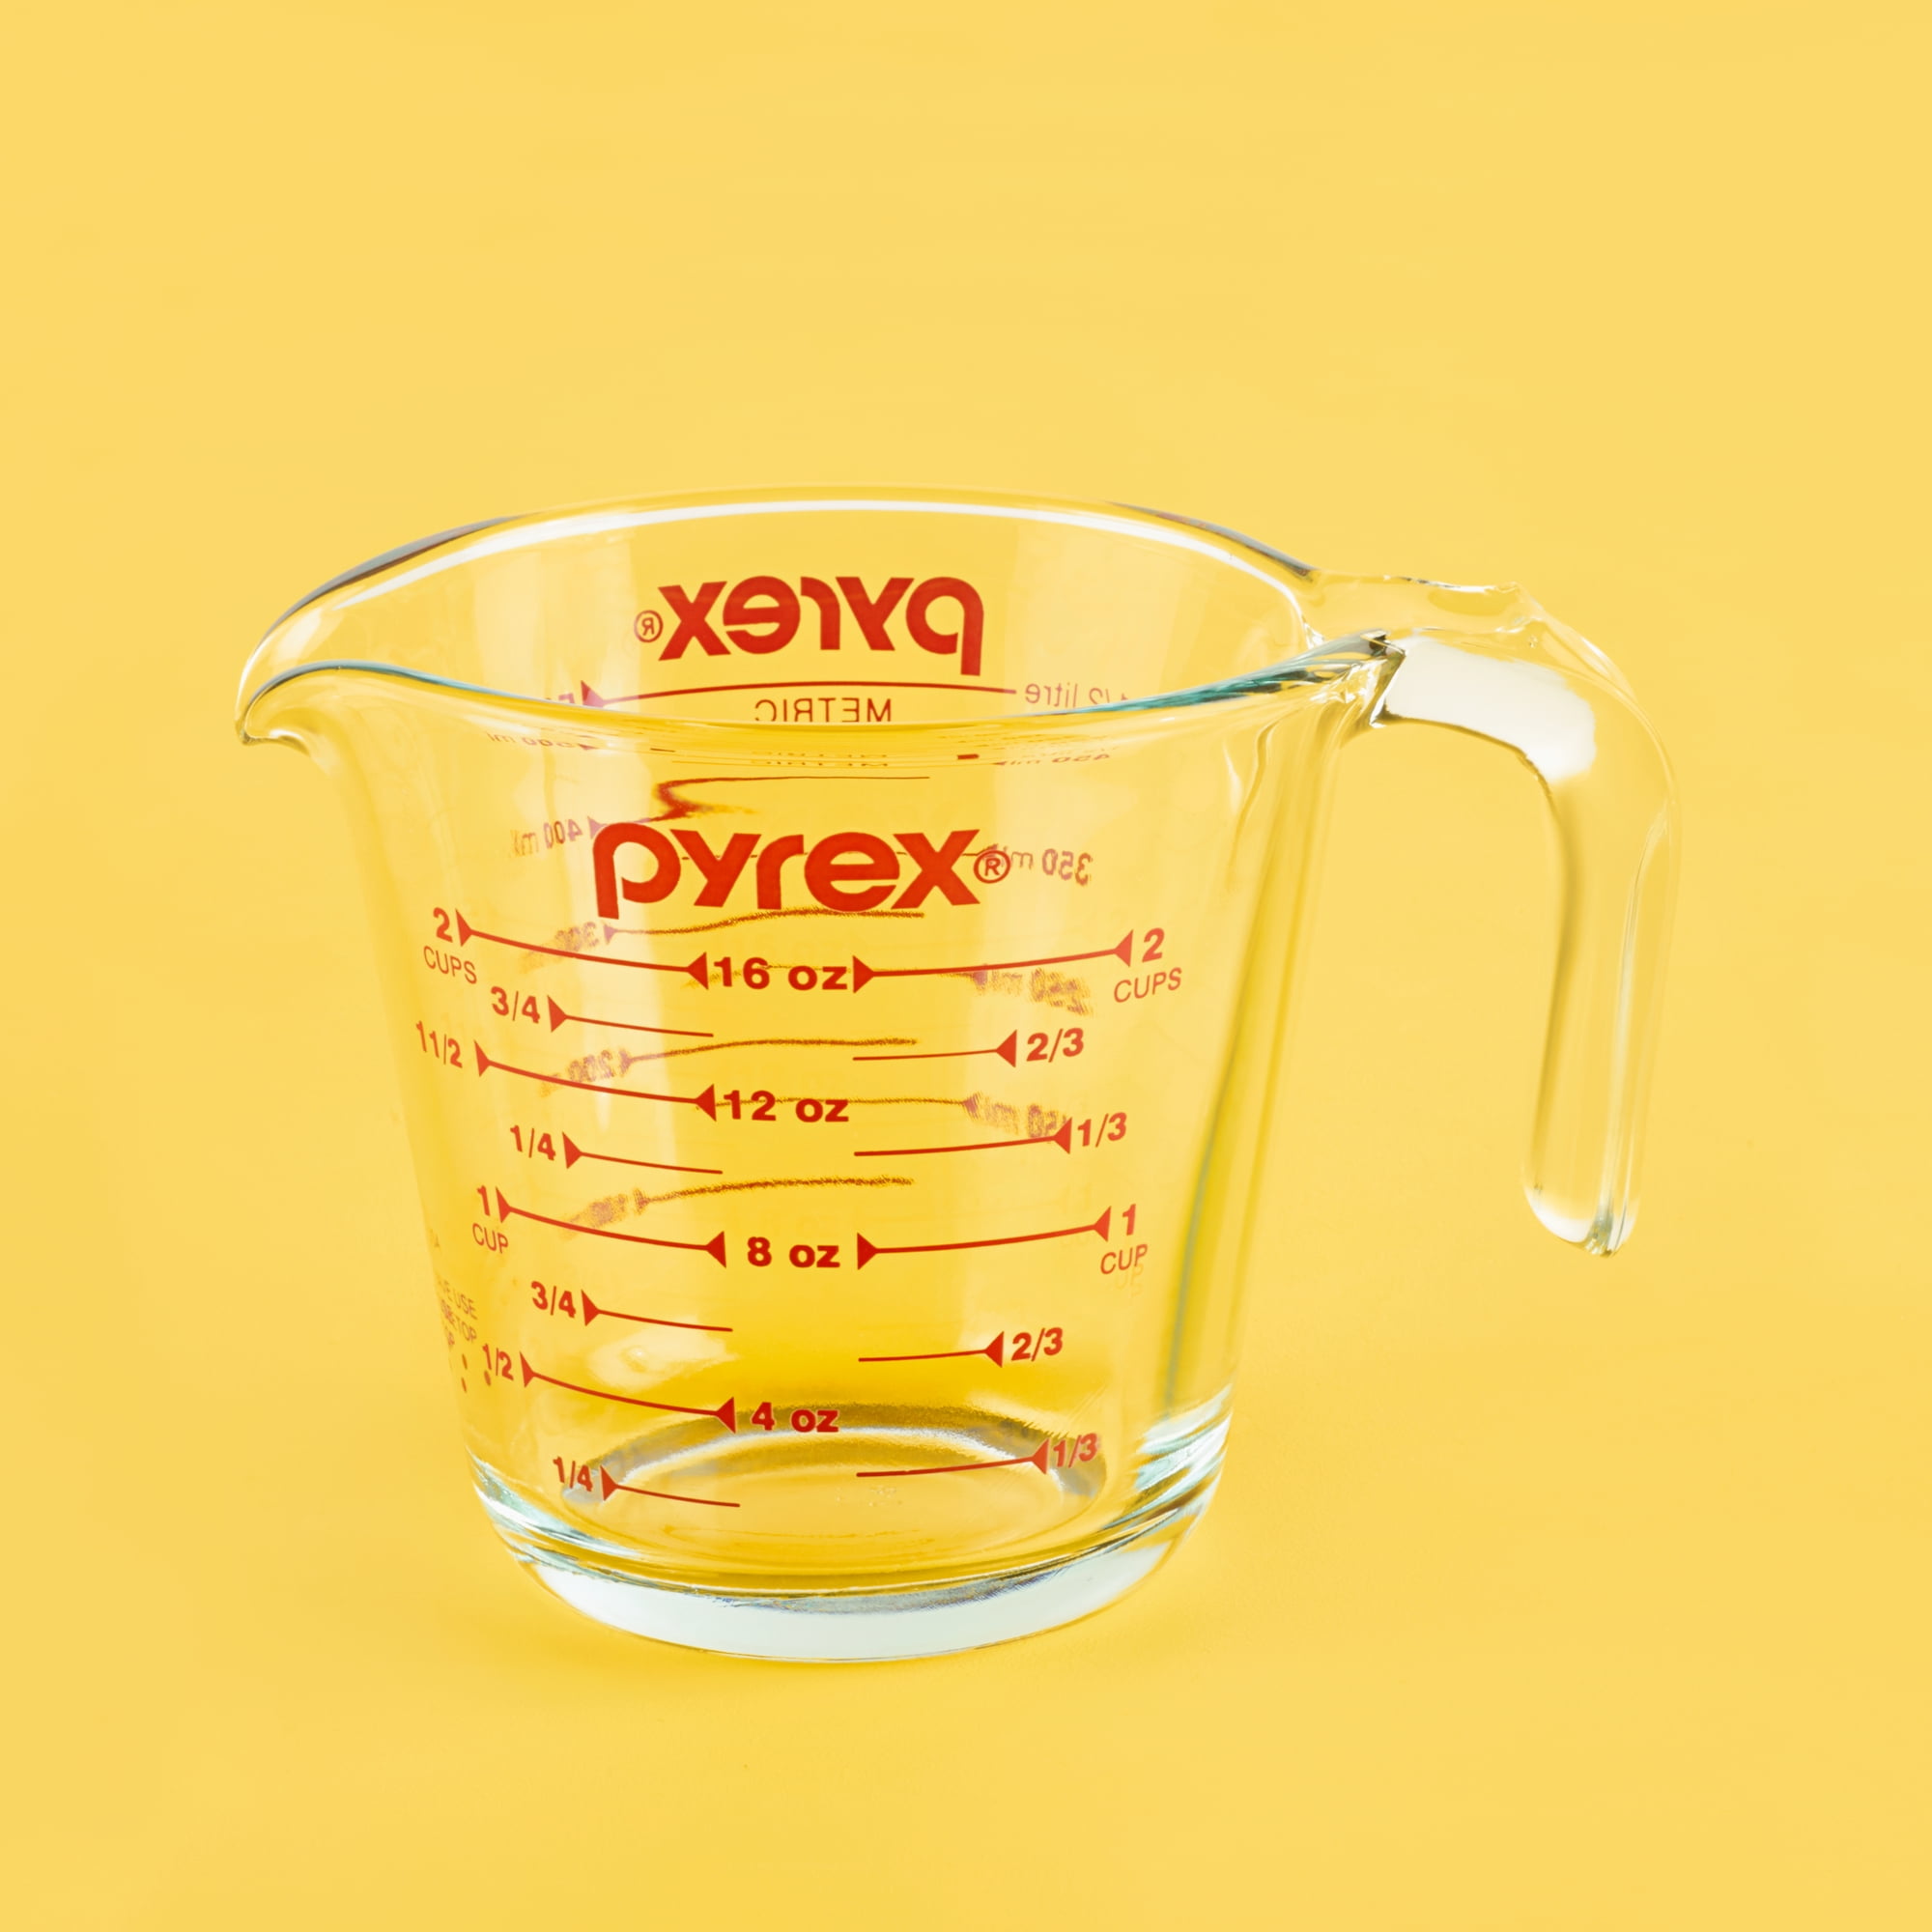 PYREX 3 Piece Glass Measuring Cup Set - Clear NEW IN BOX! # 1615903  AUTHENTIC